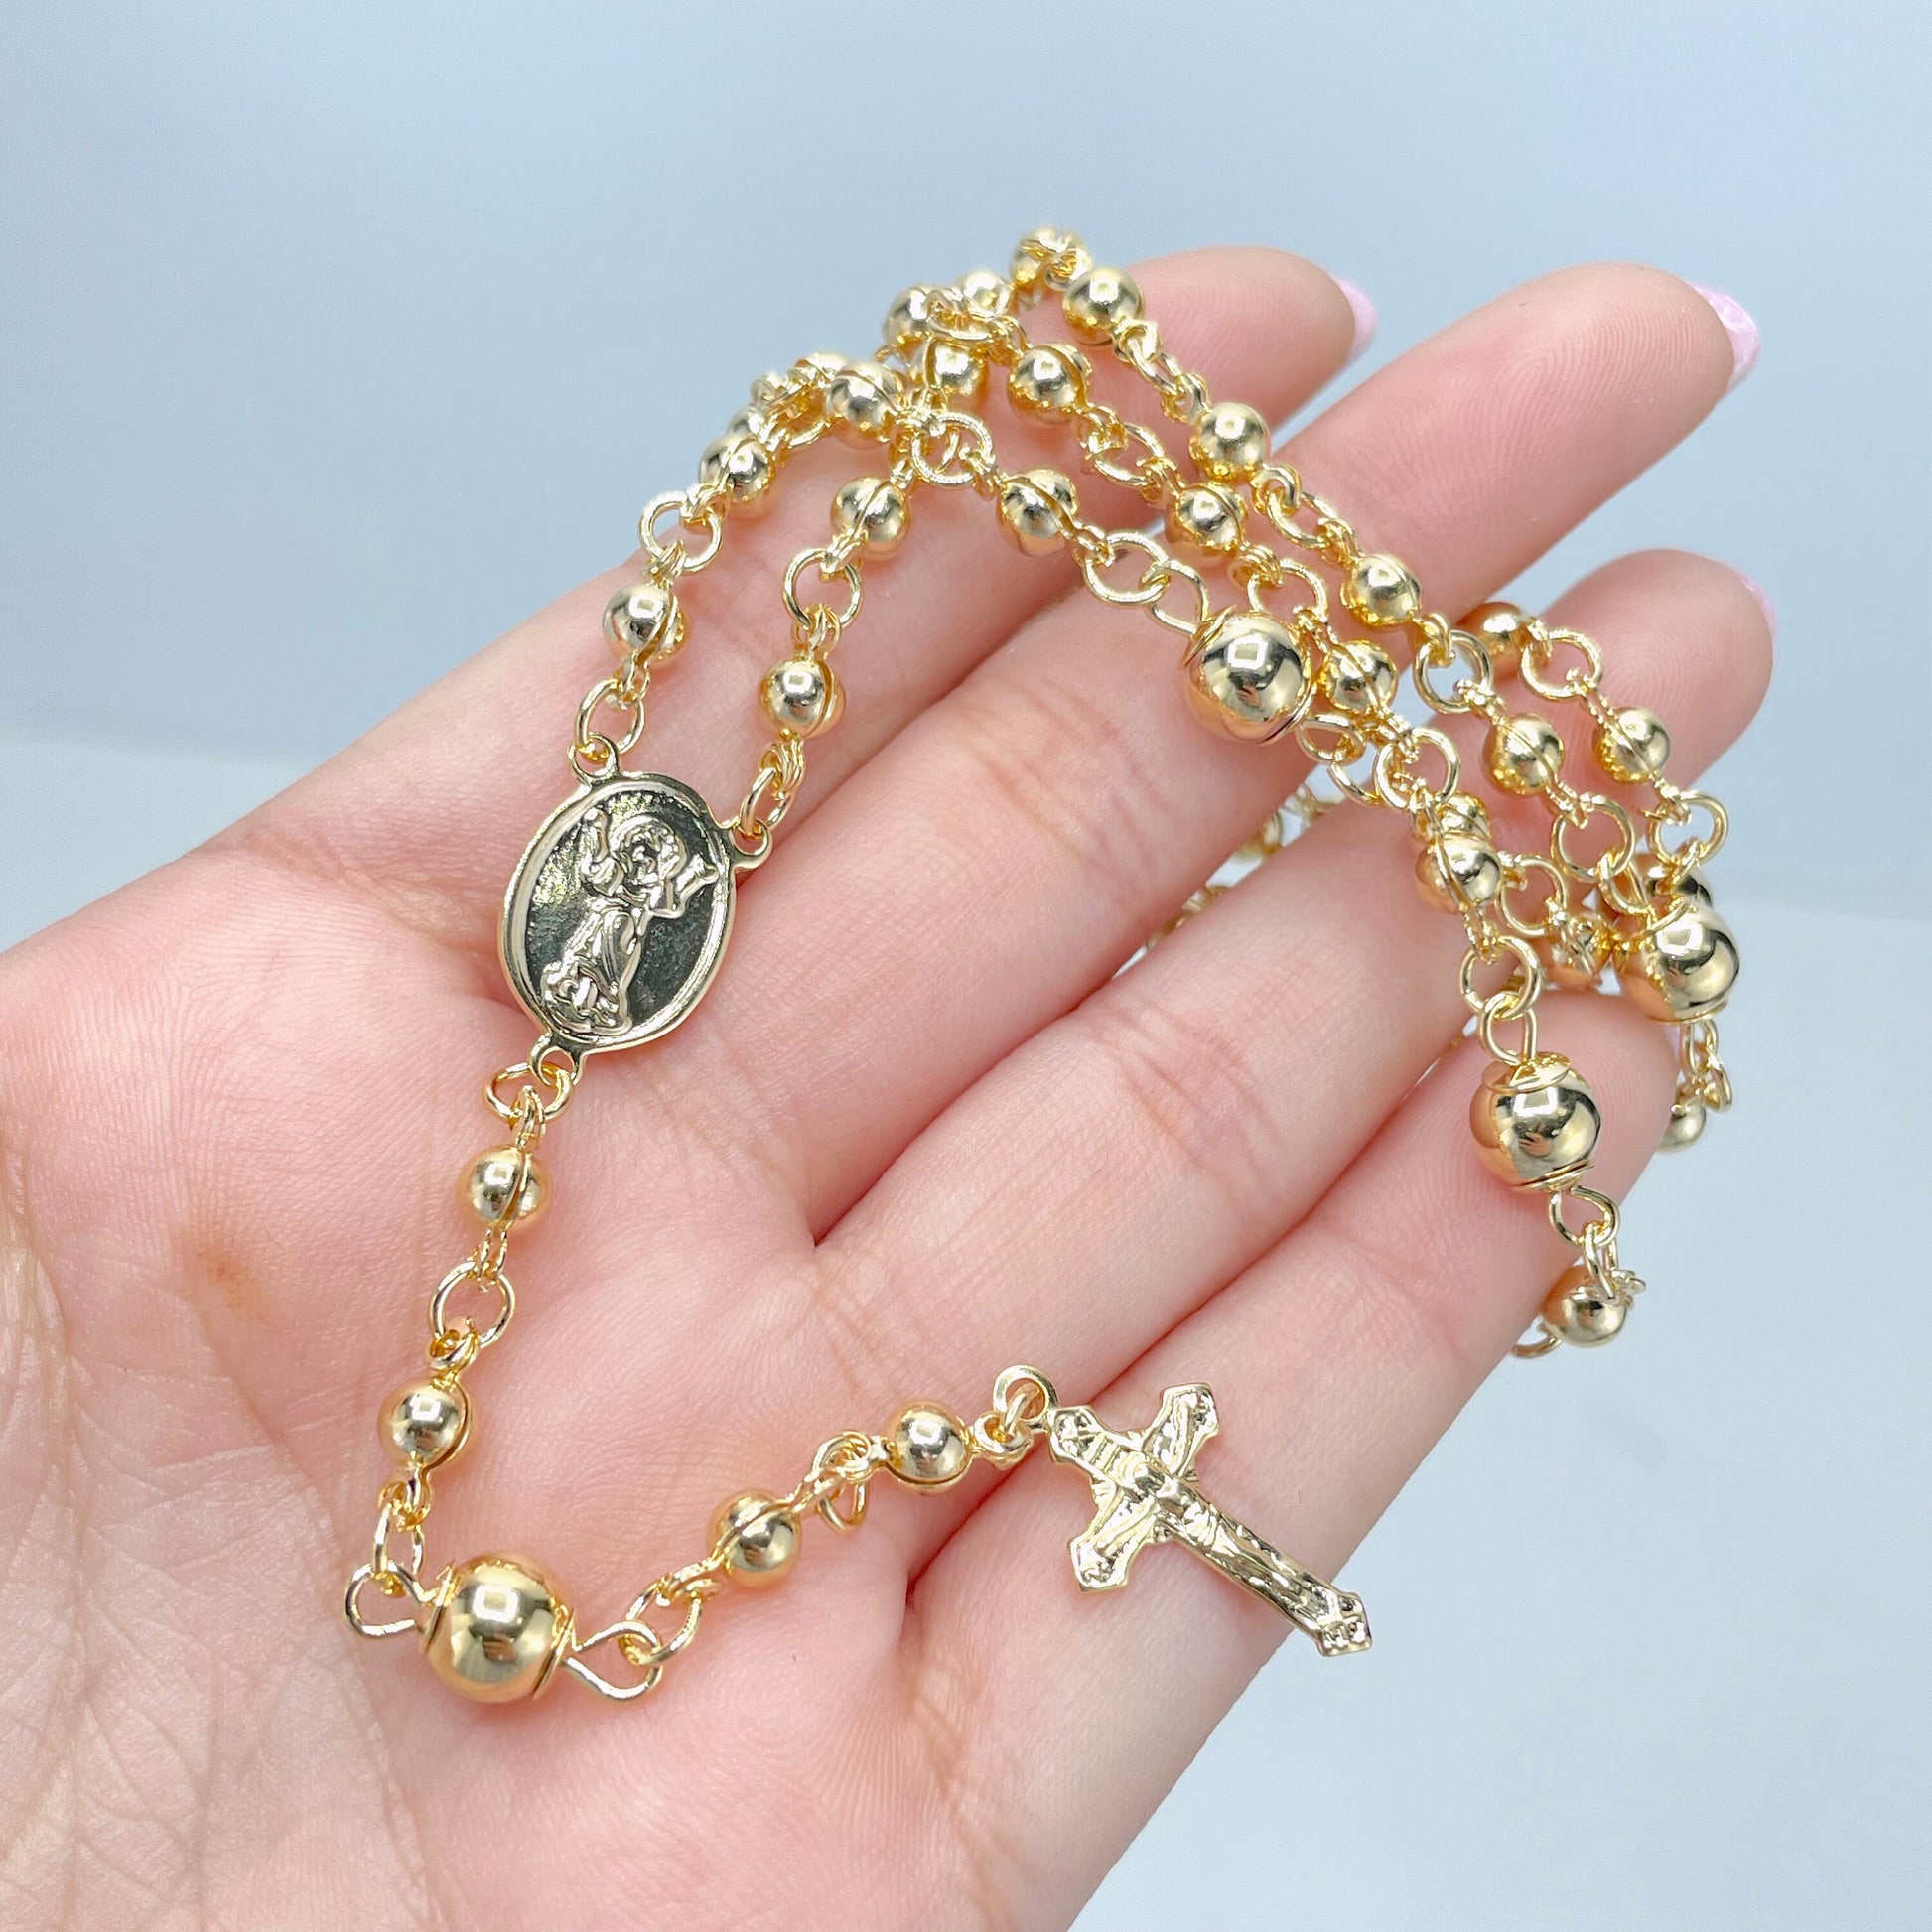 18k Gold Filled Beaded Divine Child, Divino Nino Rosary Necklace, Wholesale Jewelry Making Supplies